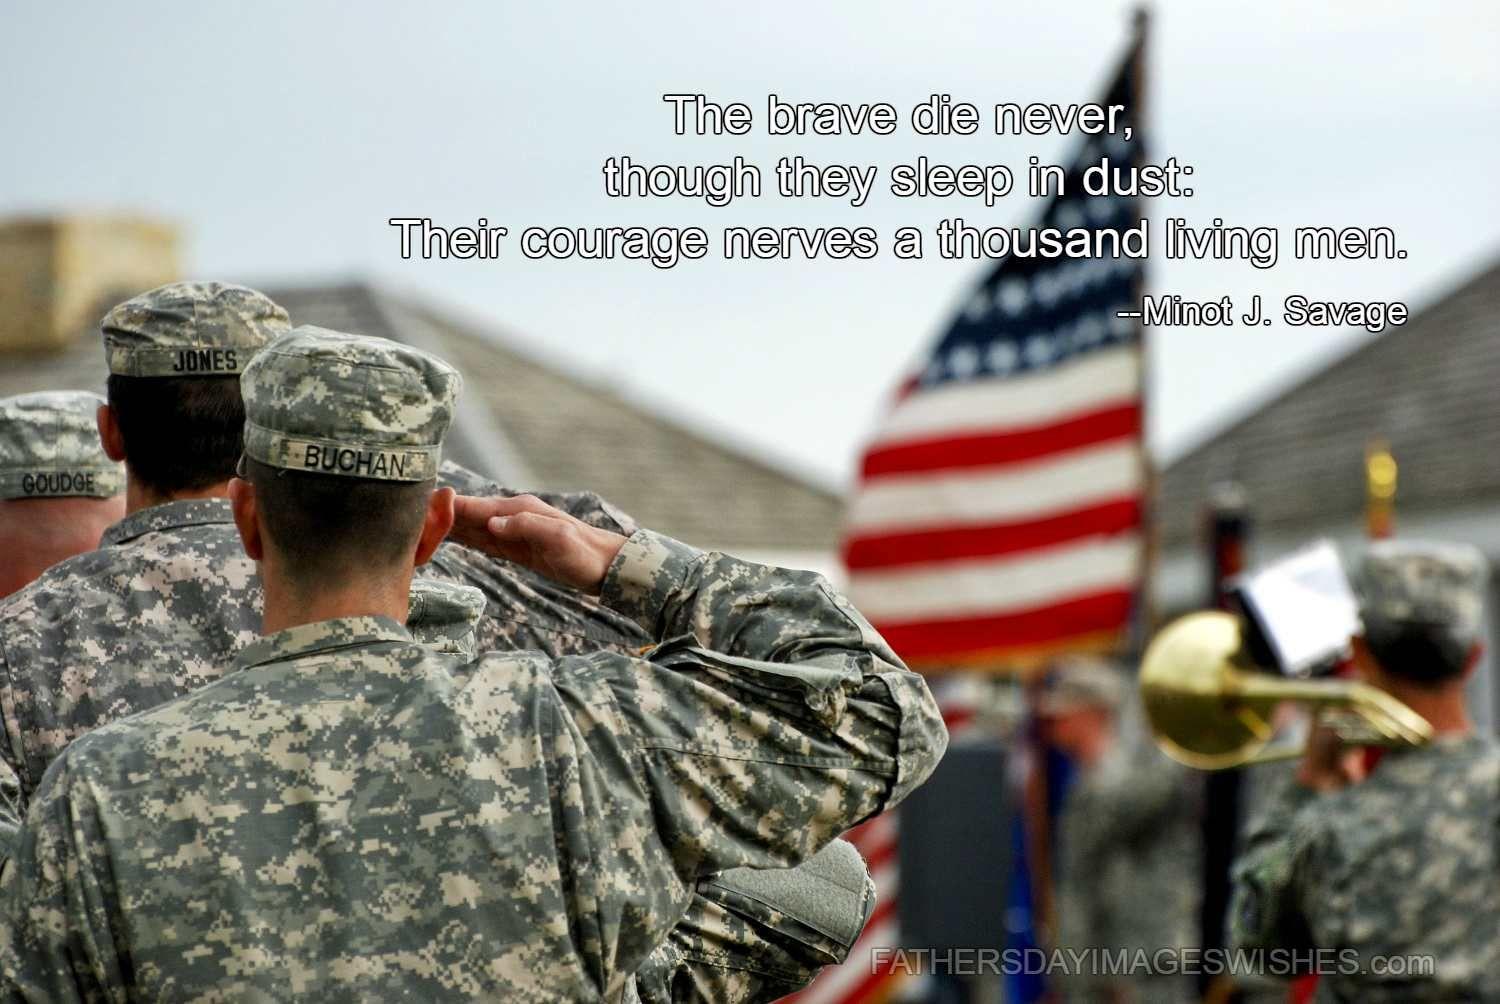 Armed Forces Day Best Quotes. Armed Forces Day Quotes & Image